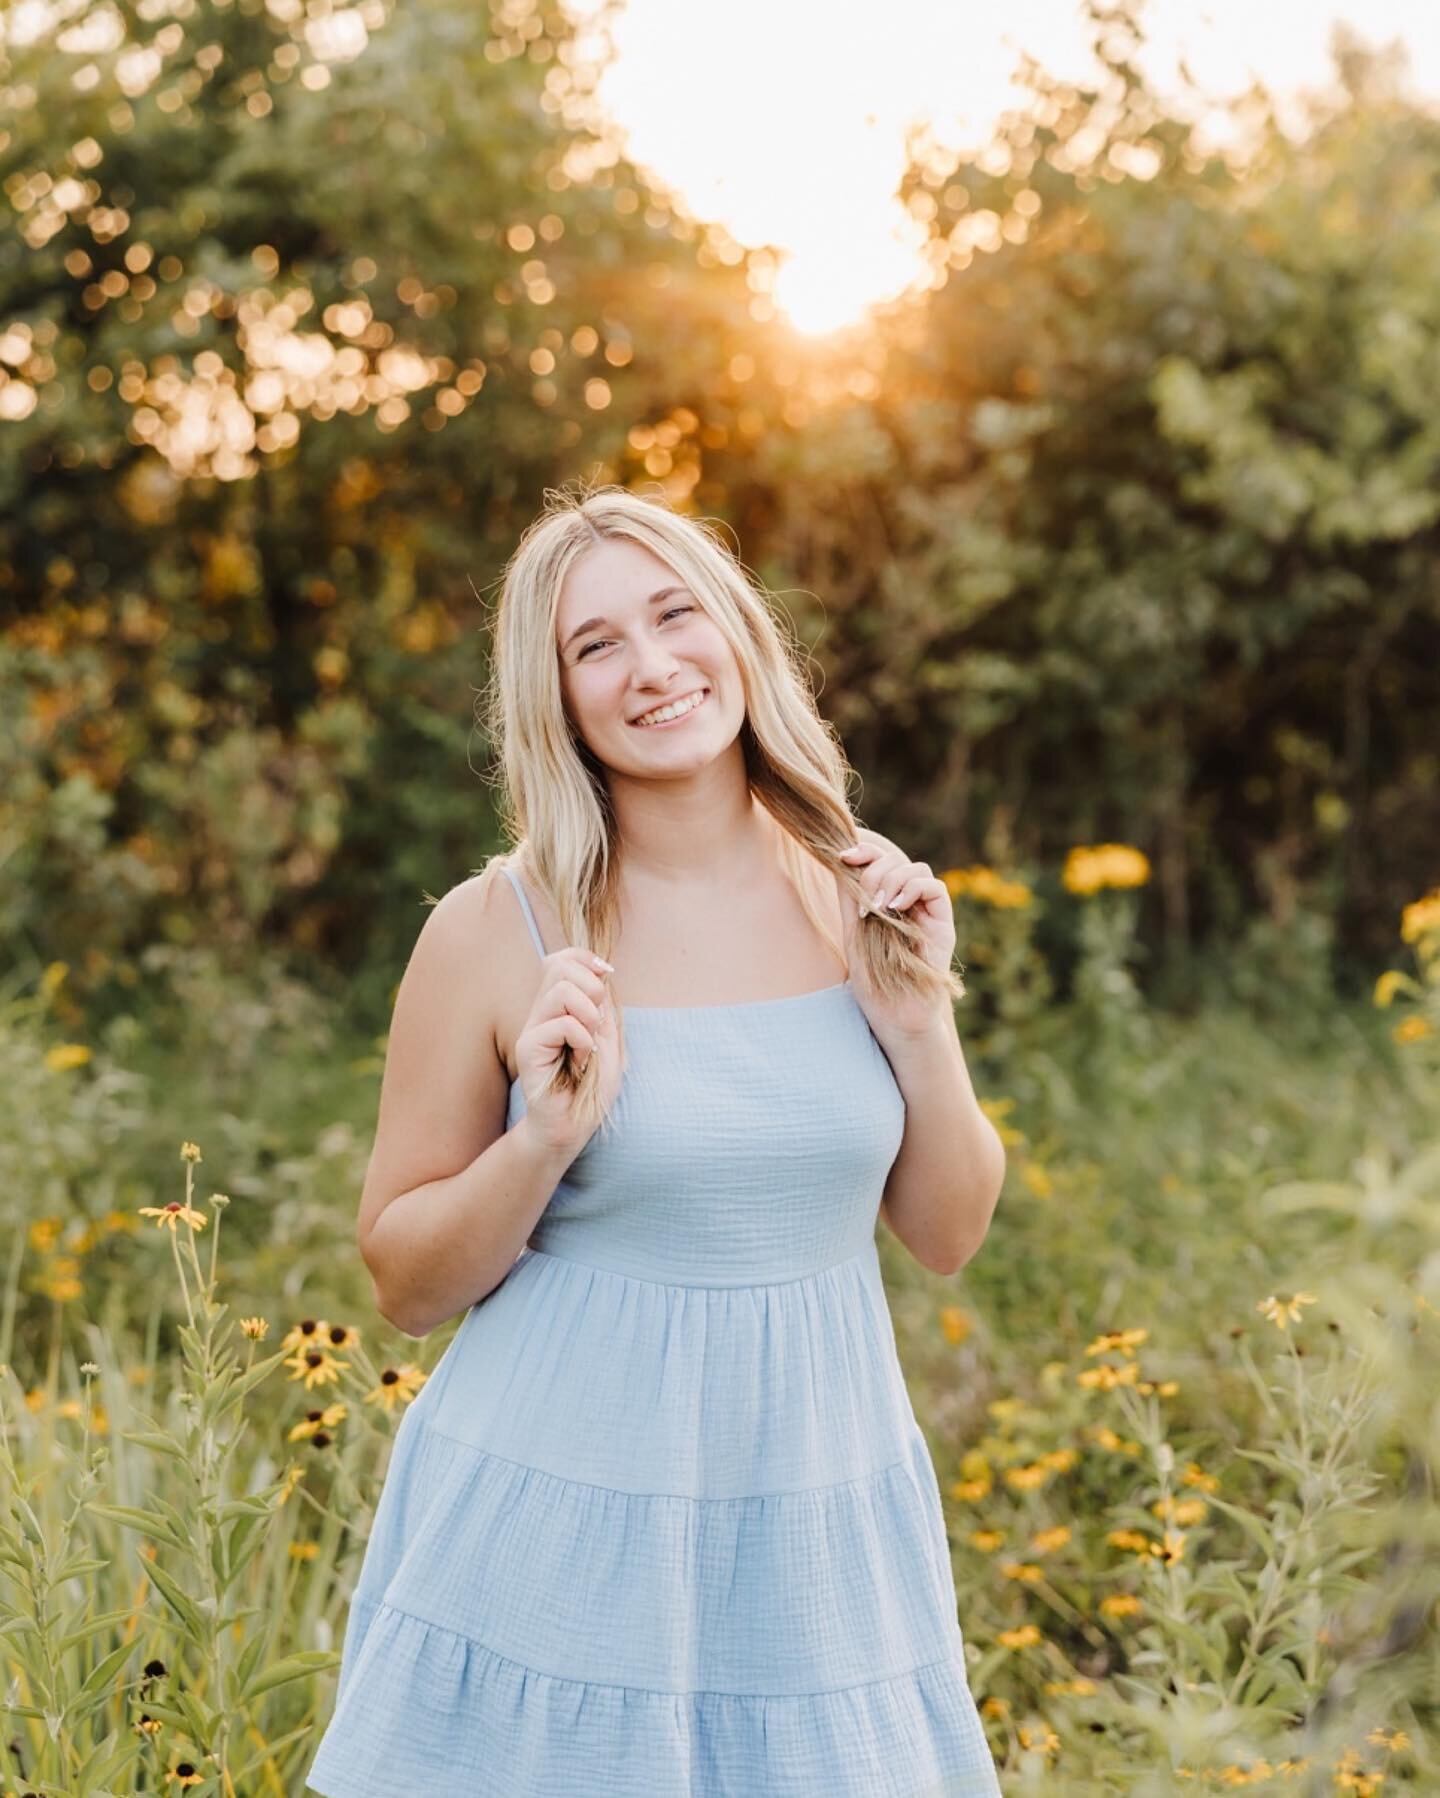 A sneak peek from Halle&rsquo;s Senior session. Swipe to see them all! Doesn&rsquo;t she look good?